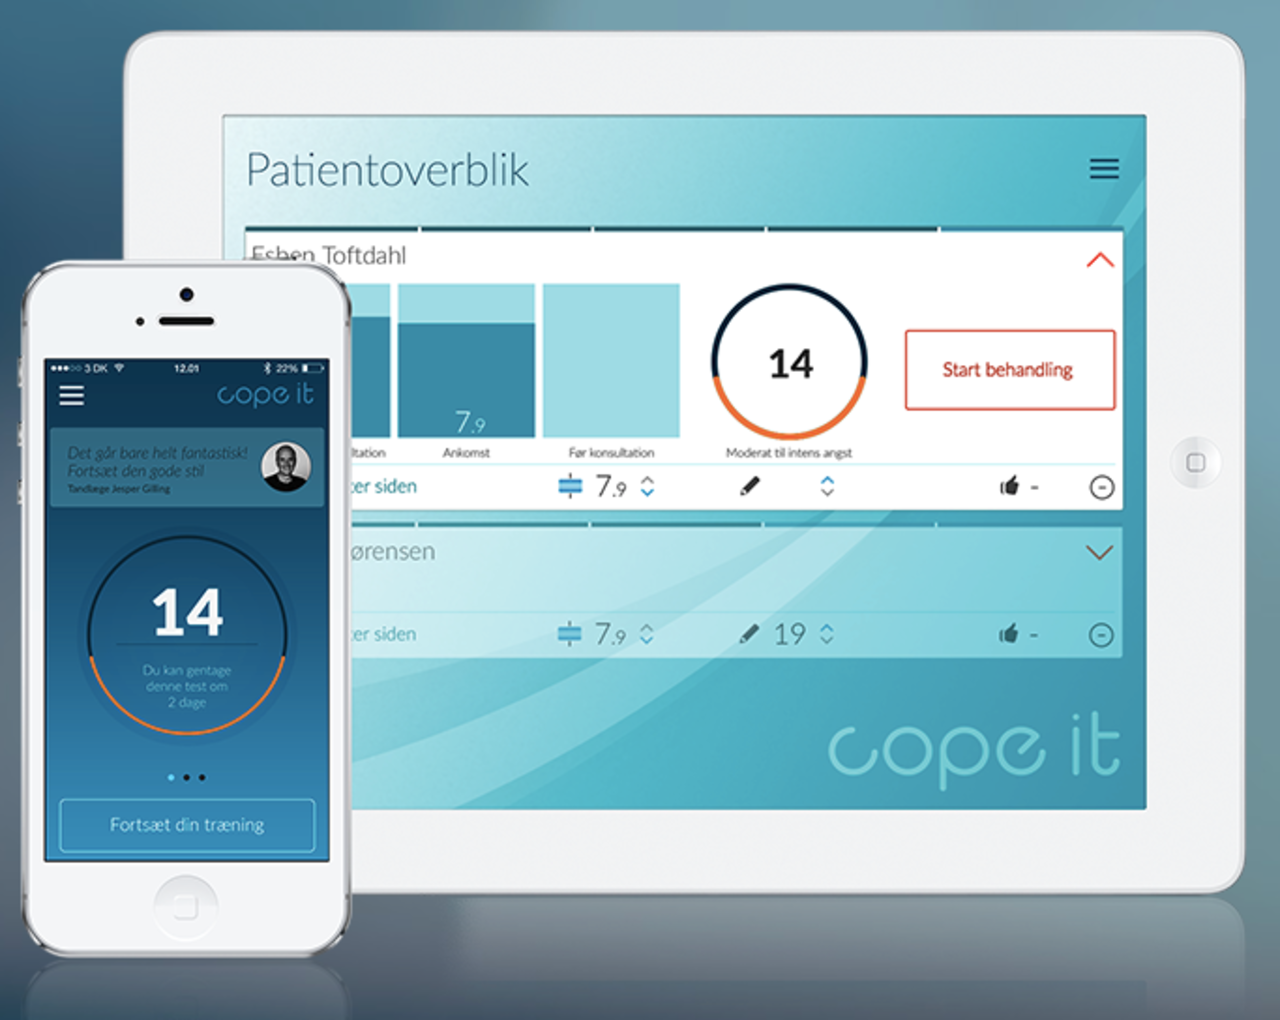 Suffering from "dental anxiety"? An upcoming app called Cope It, developed in Denmark, promises to have you sorted.